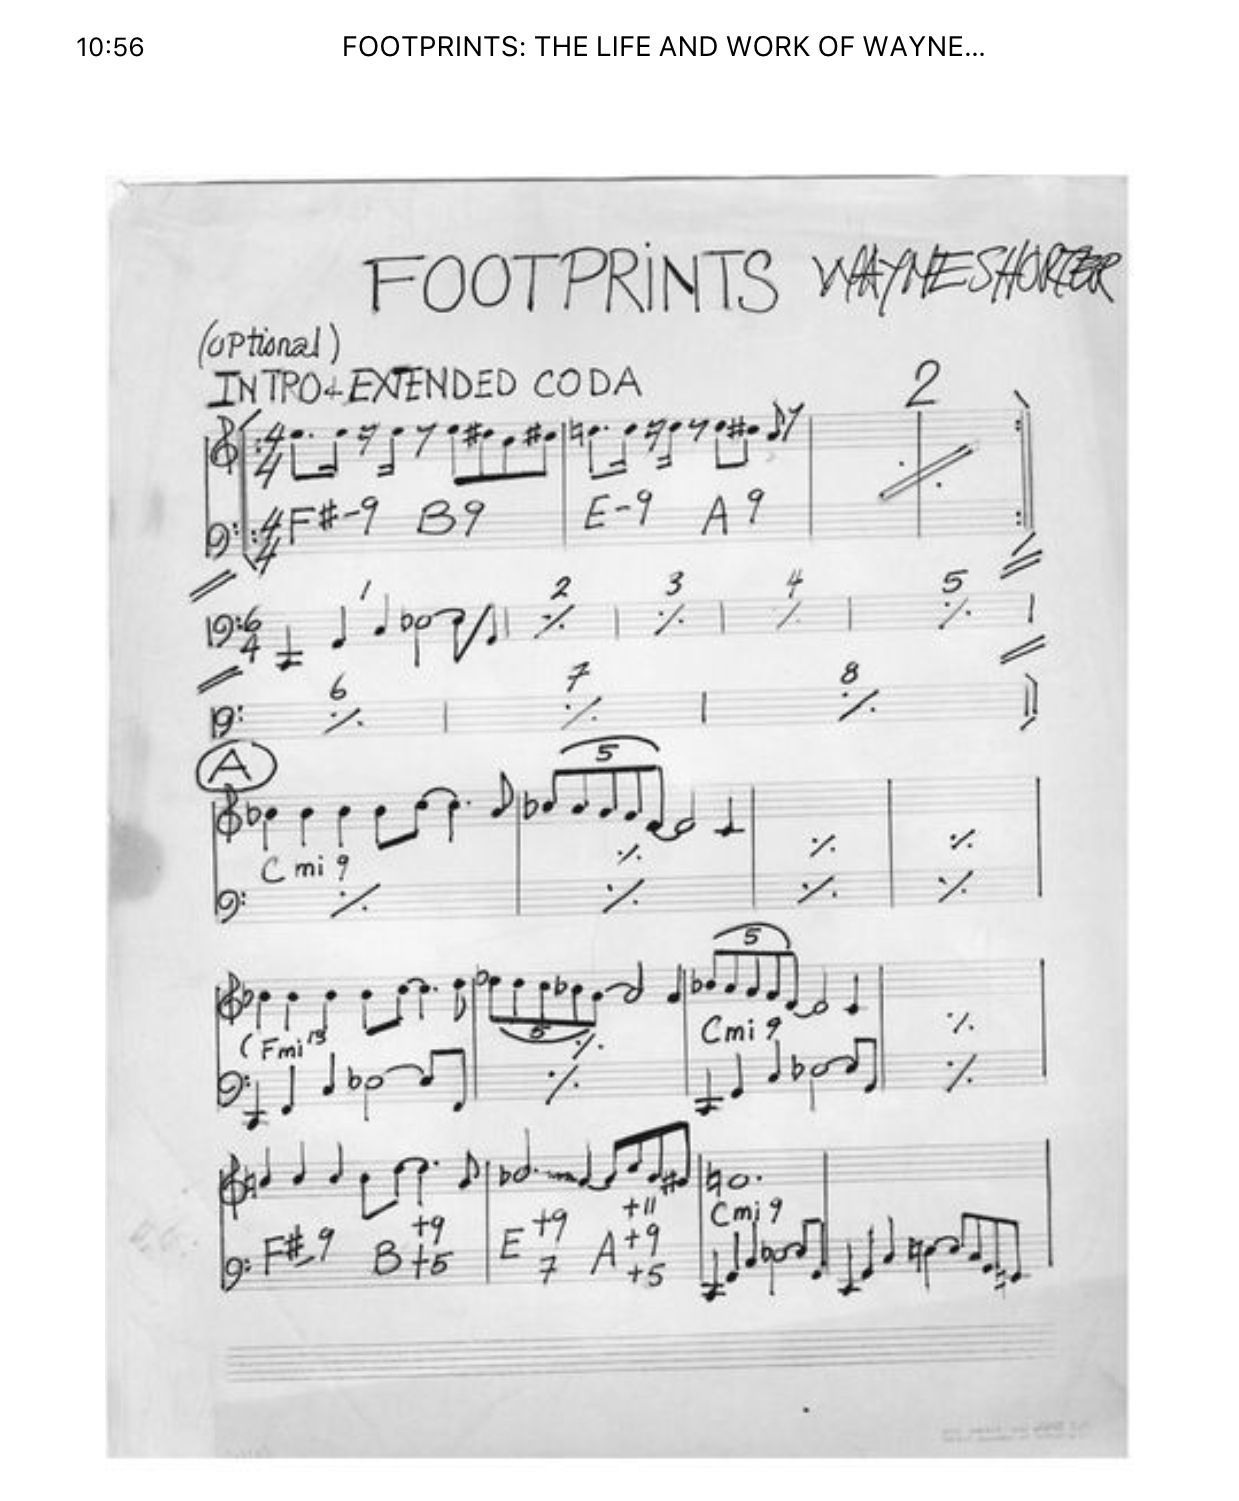 Wayne Shorter original charts - are they available?-4860f516-ae49-44c0-9782-0855a38711db-jpeg